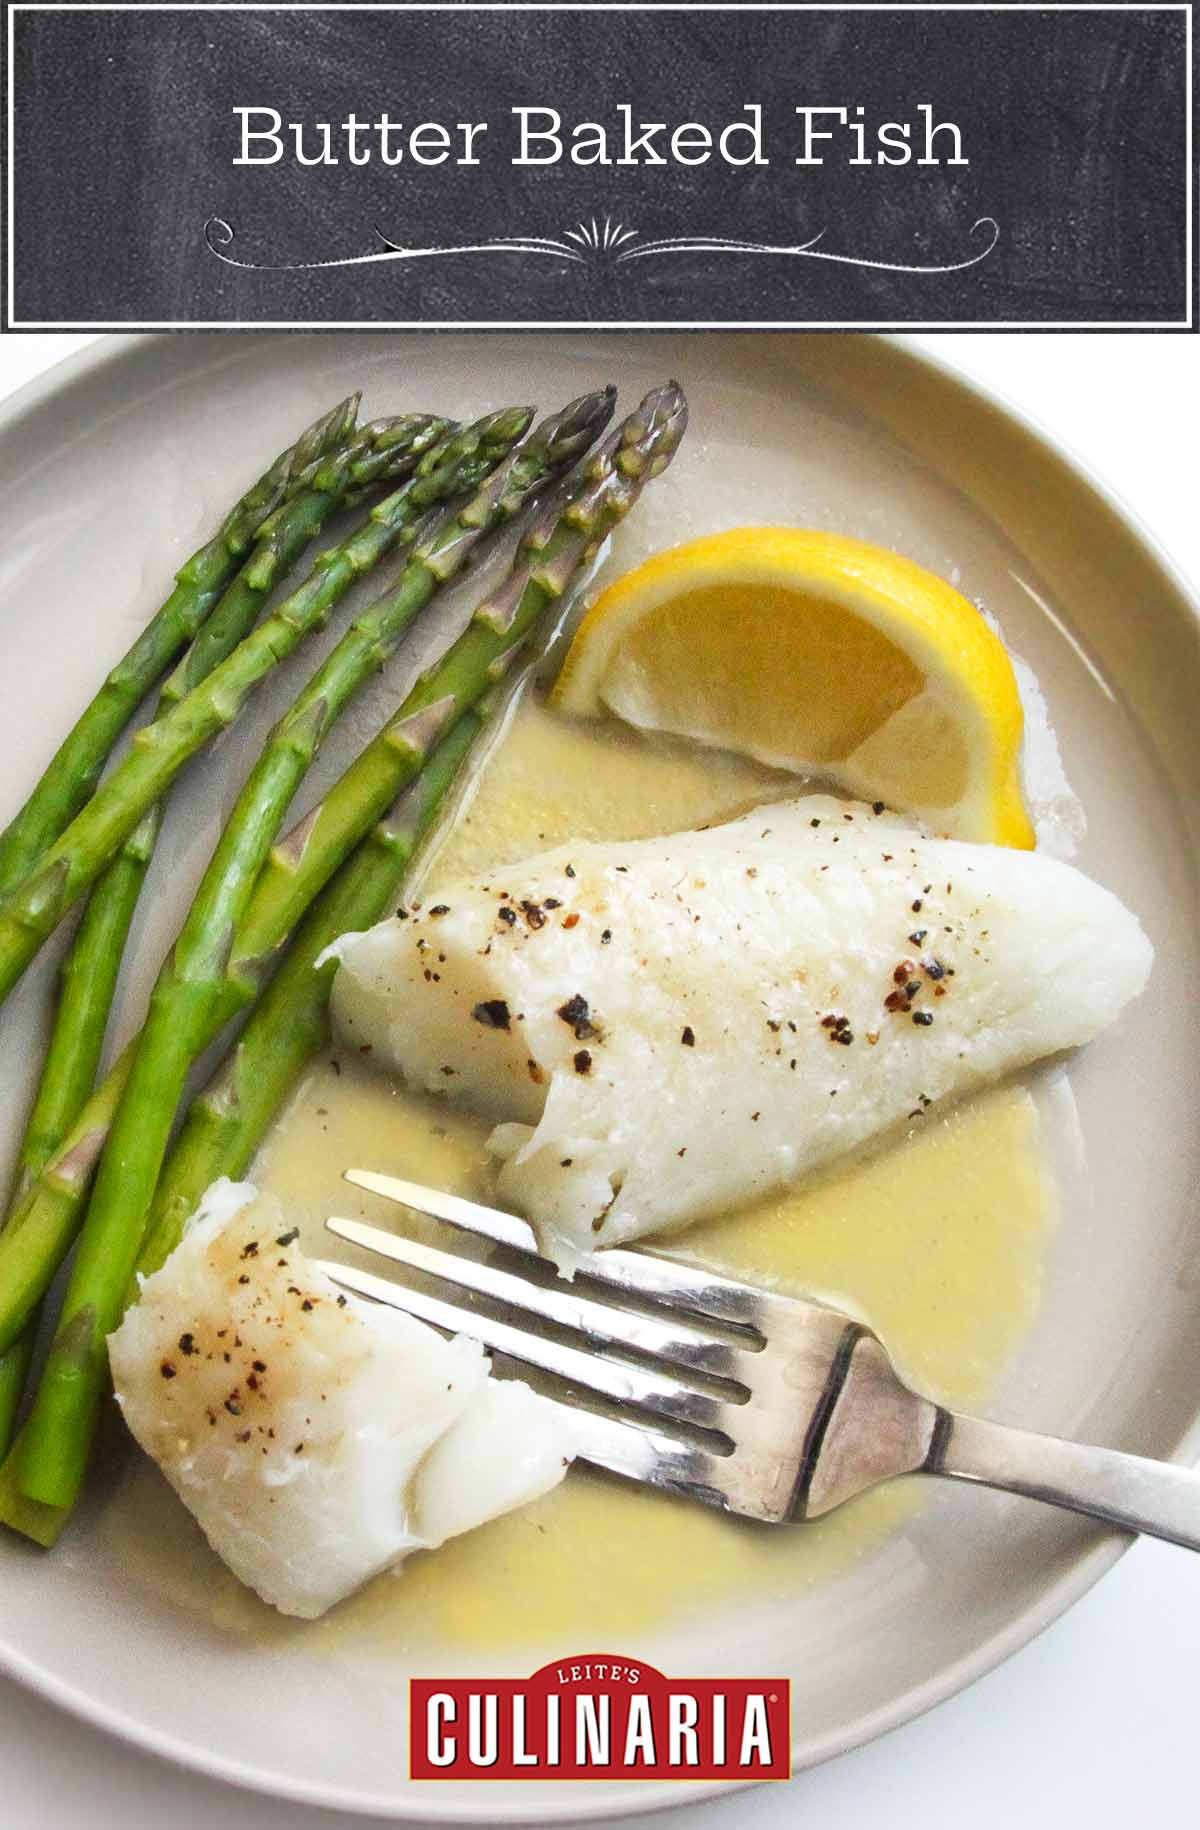 A piece of baked fish on a plate with butter sauce, a lemon wedge, and some asparagus spears.